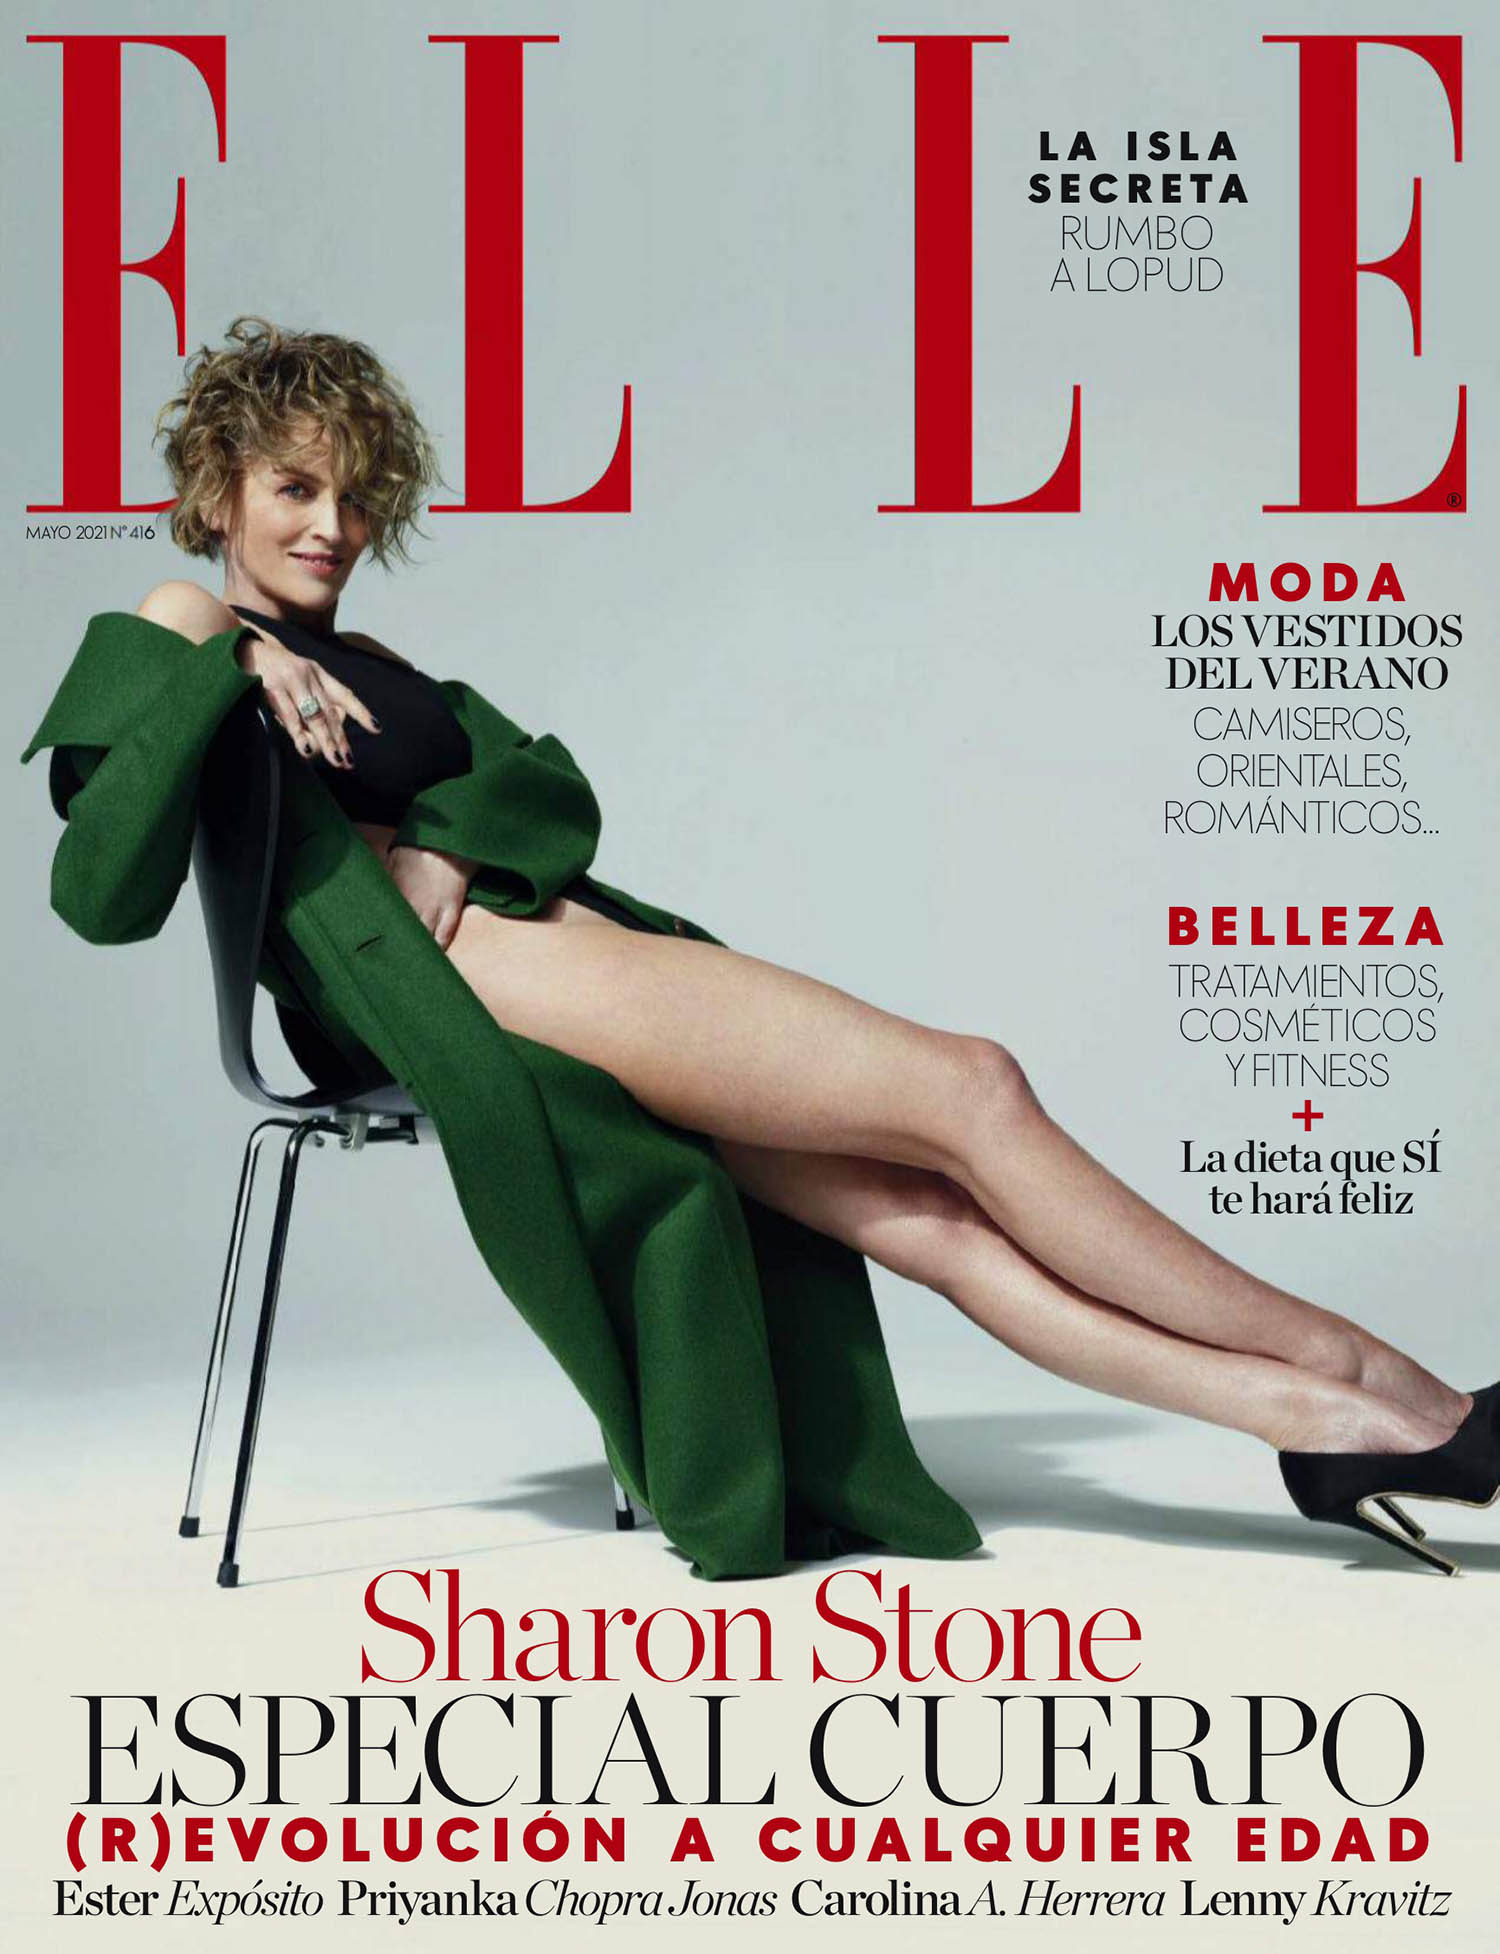 Sharon Stone covers Elle Spain May 2021 by Michael Muller